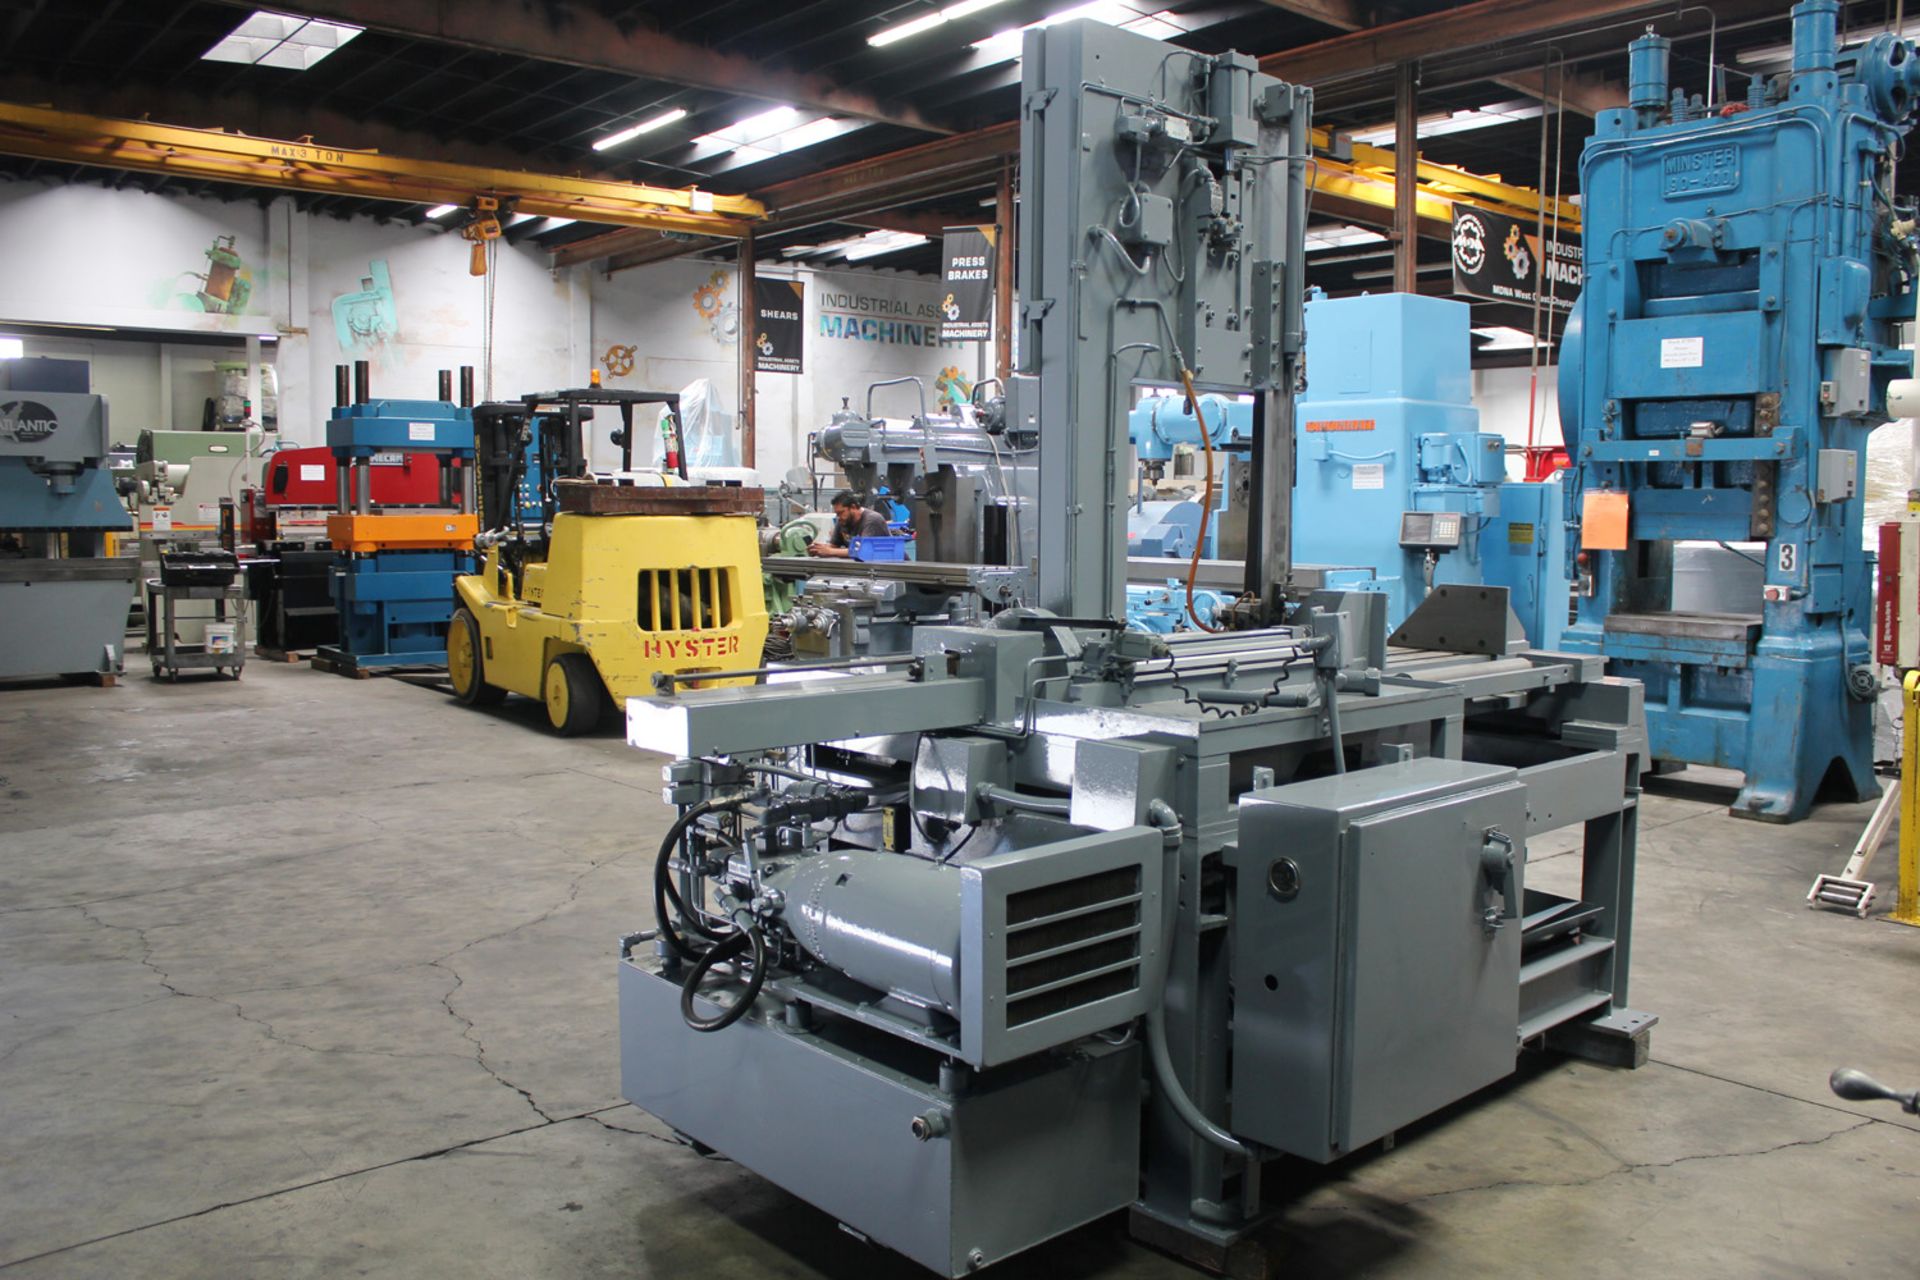 21" Throat Kalamazoo Auto Vertical Metal Cutting Bandsaw Tilt Frame VTH-21S - Located In: Huntington - Image 3 of 12